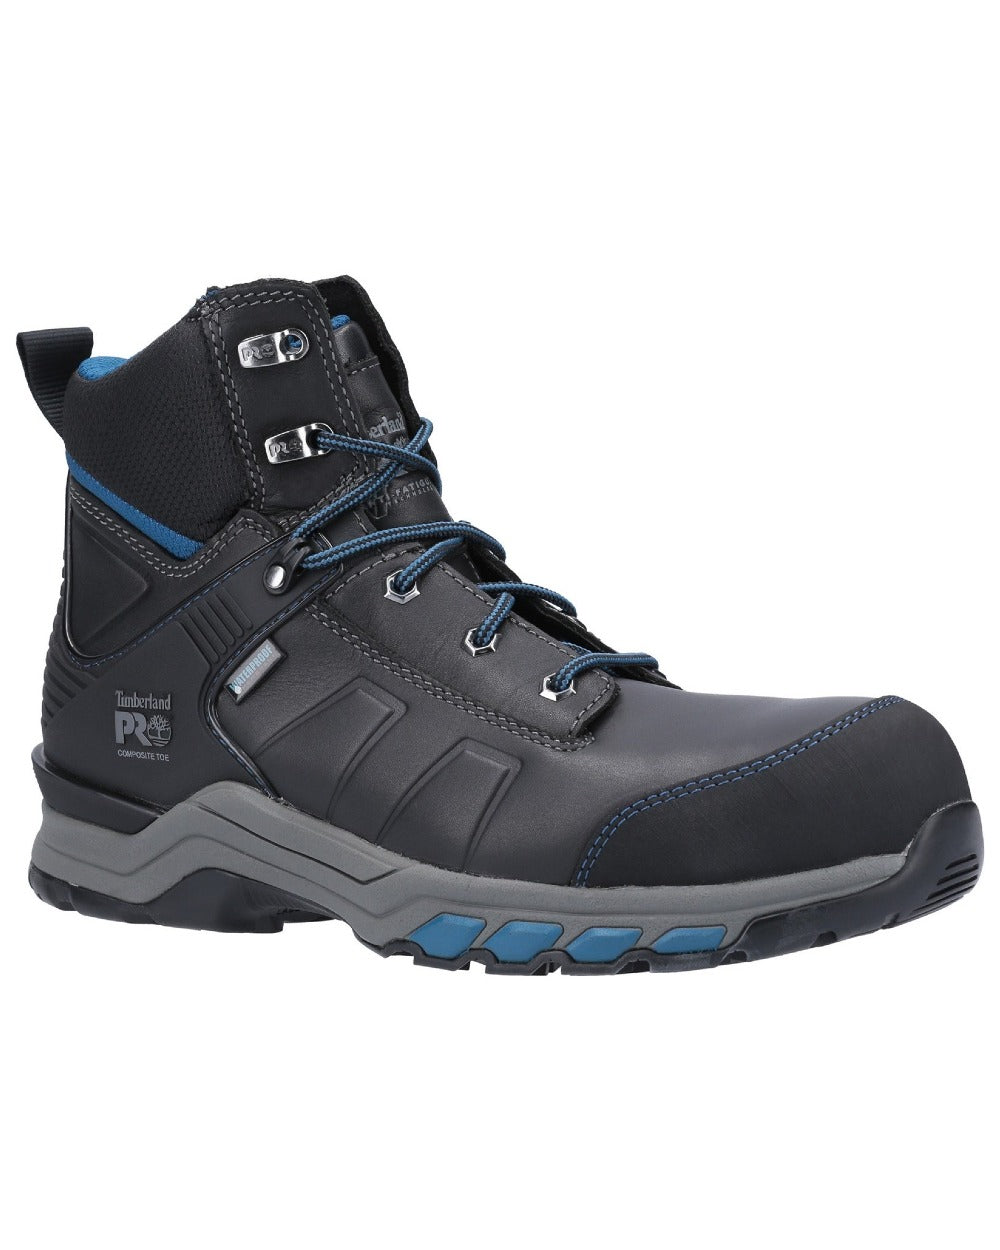 Black/Teal Timberland Pro Hypercharge Composite Safety Toe Work Boots on white background 